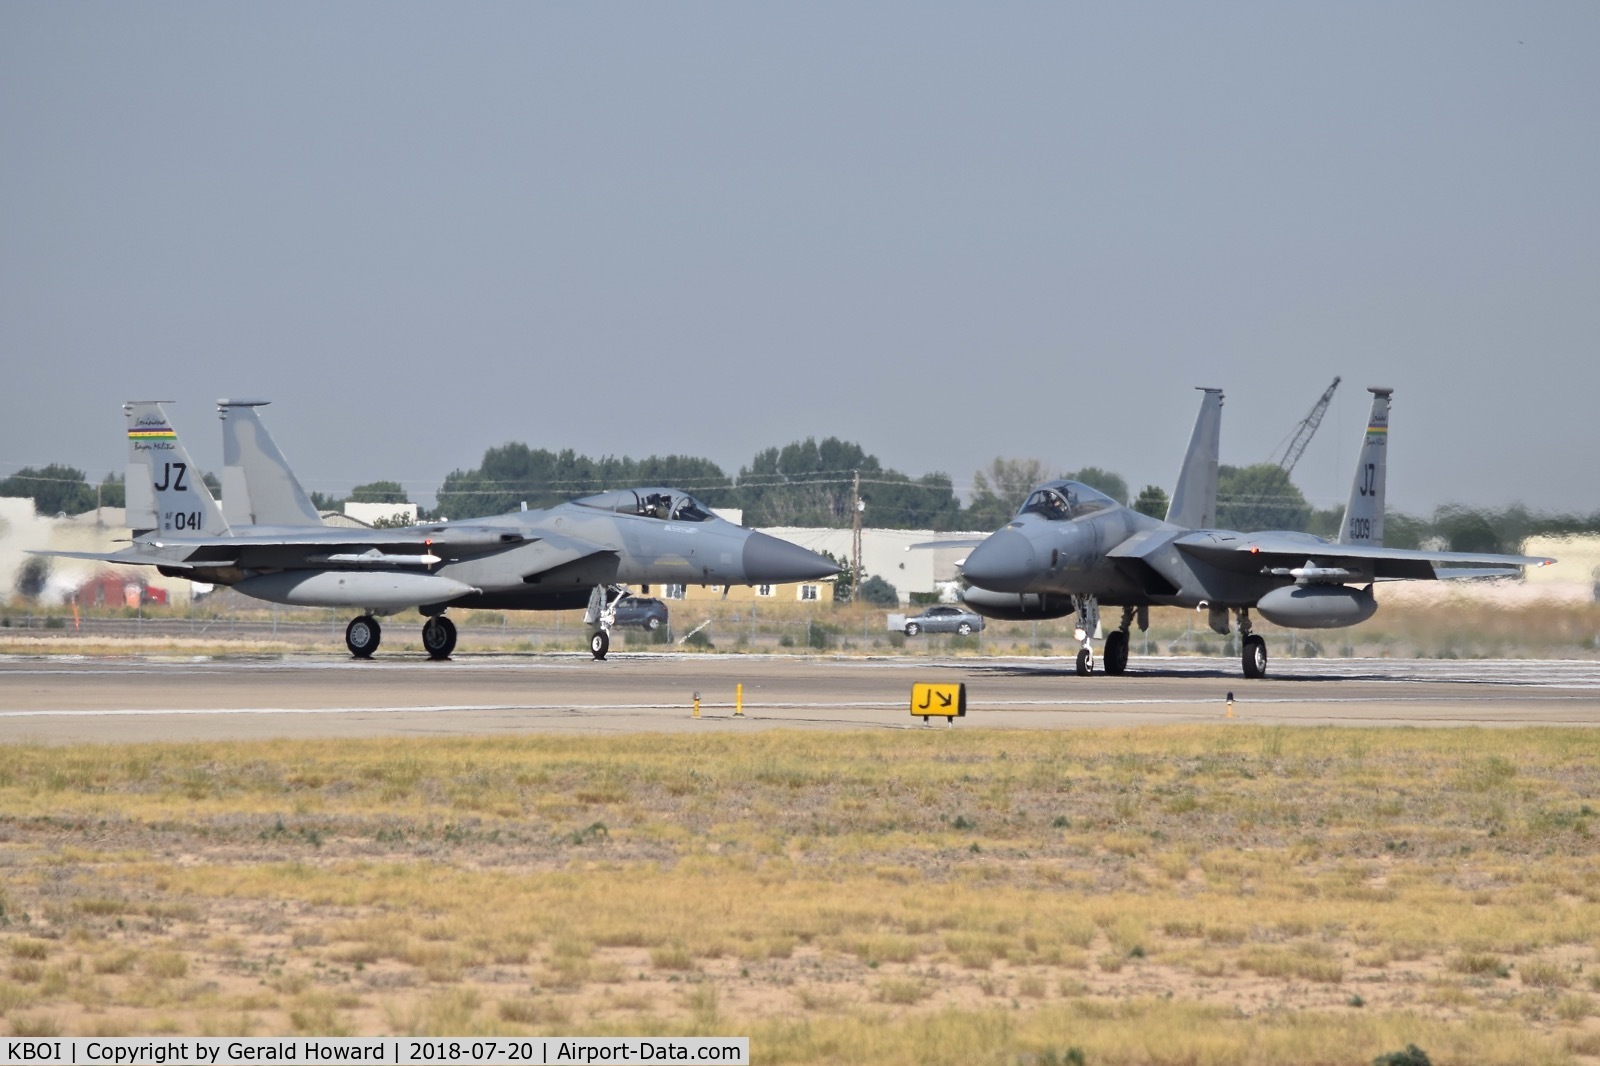 Boise Air Terminal/gowen Fld Airport (BOI) - F-15C fighters from the 122nd Fighter Sq. 